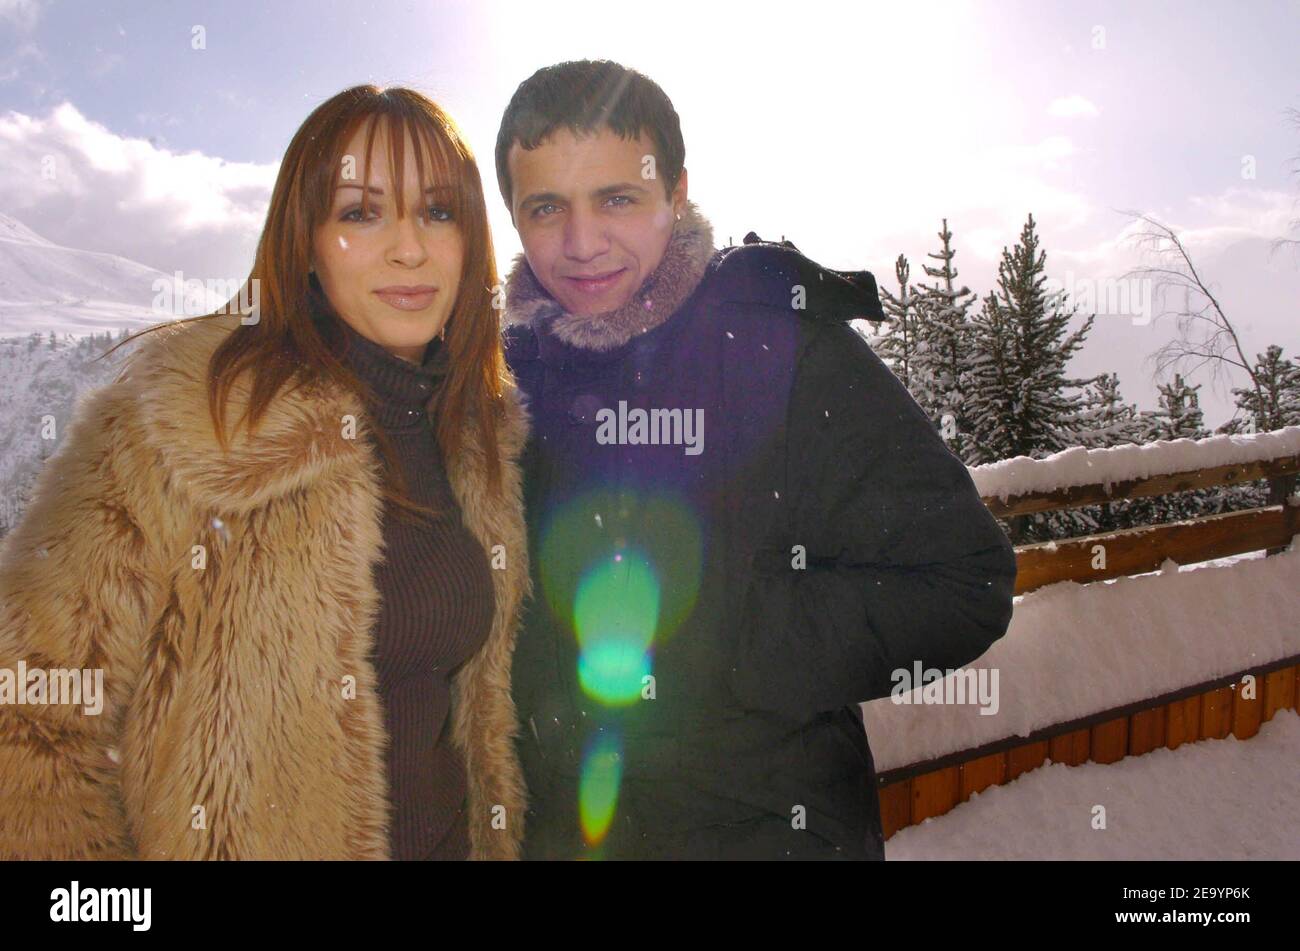 French rai singer and actor Faudel poses with his girlfriend Anissa at a photocall for his movie 'Bab El Web' directed by Merzak Allouache during the 'Festival du Film de Comedie' in l'Alpe d'Huez, France on January 19, 2005. Photo by Bruno Klein/ABACA. Stock Photo